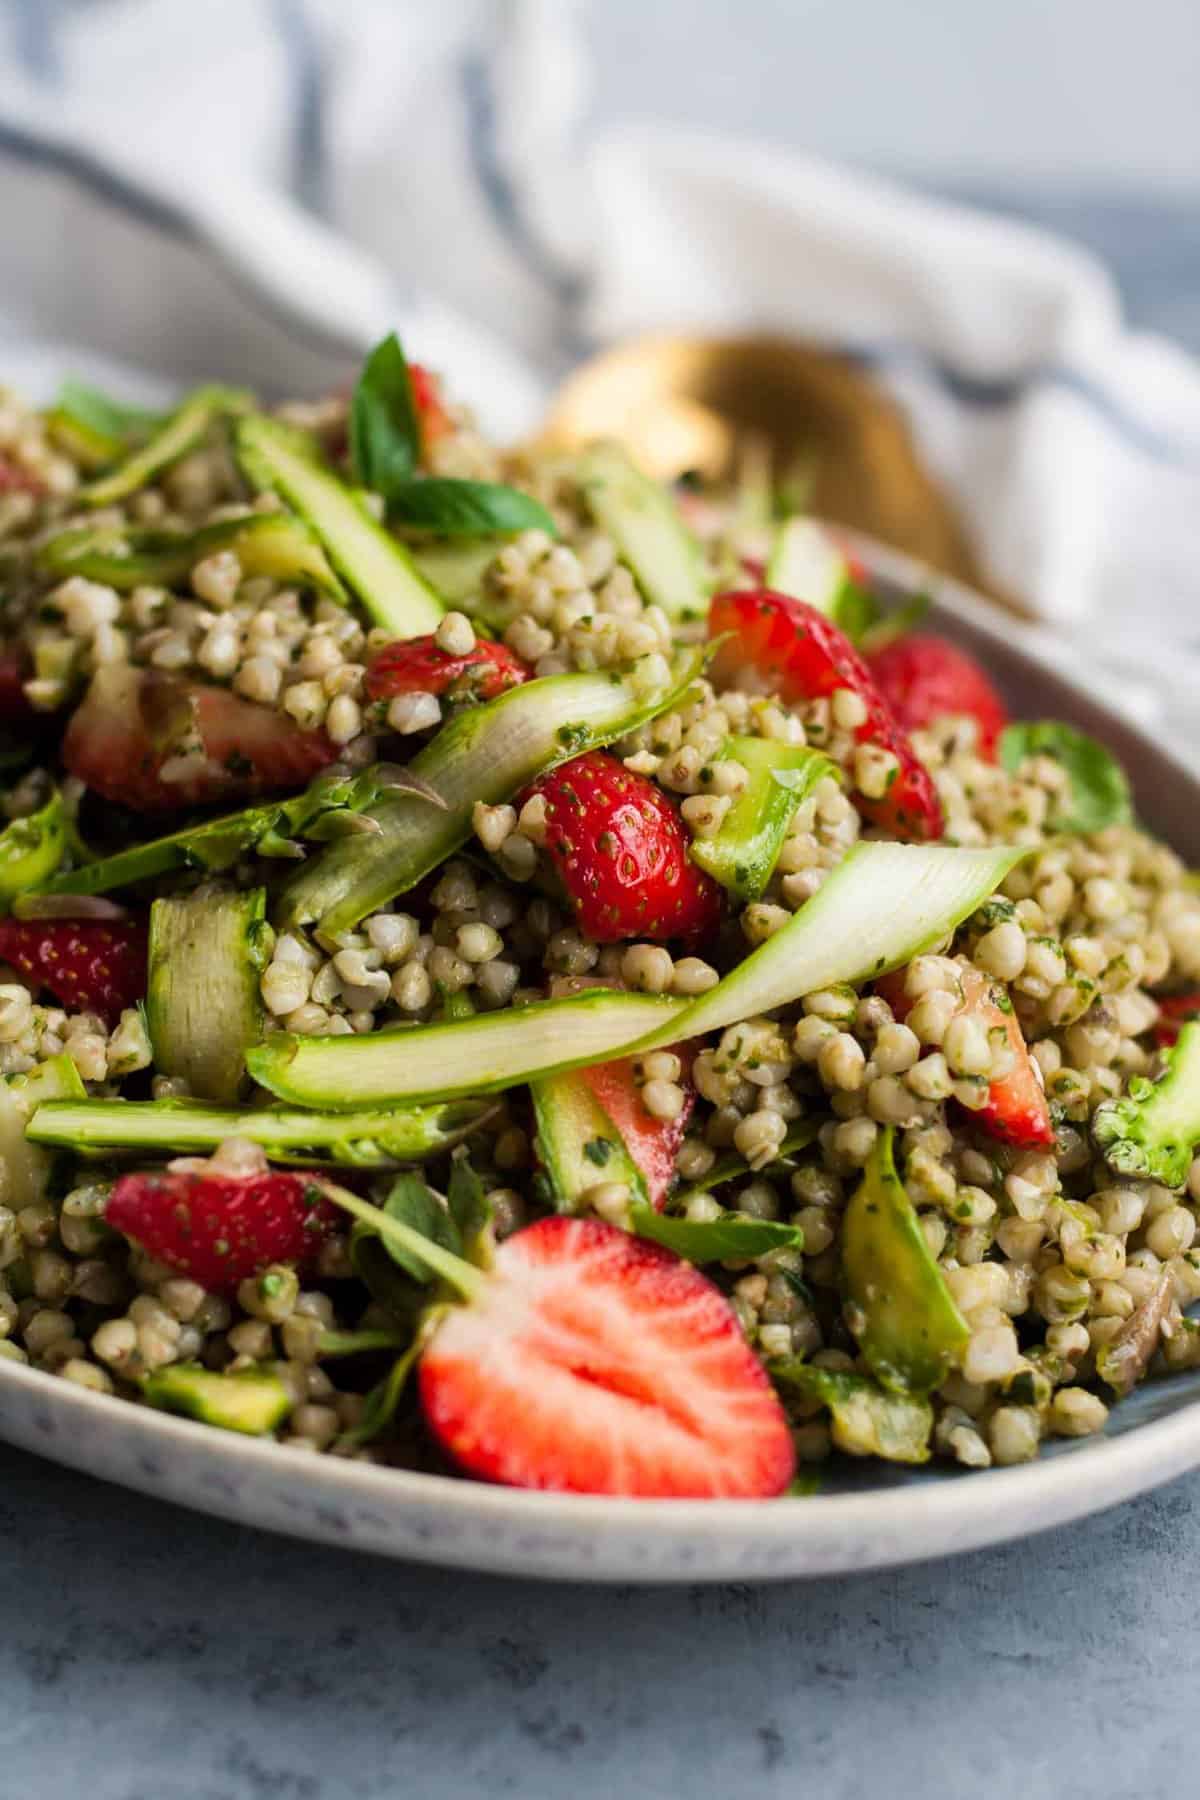 Strawberry Asparagus Buckwheat Salad | Picnics, Barbecues, Side Dishes, Salads, Summer